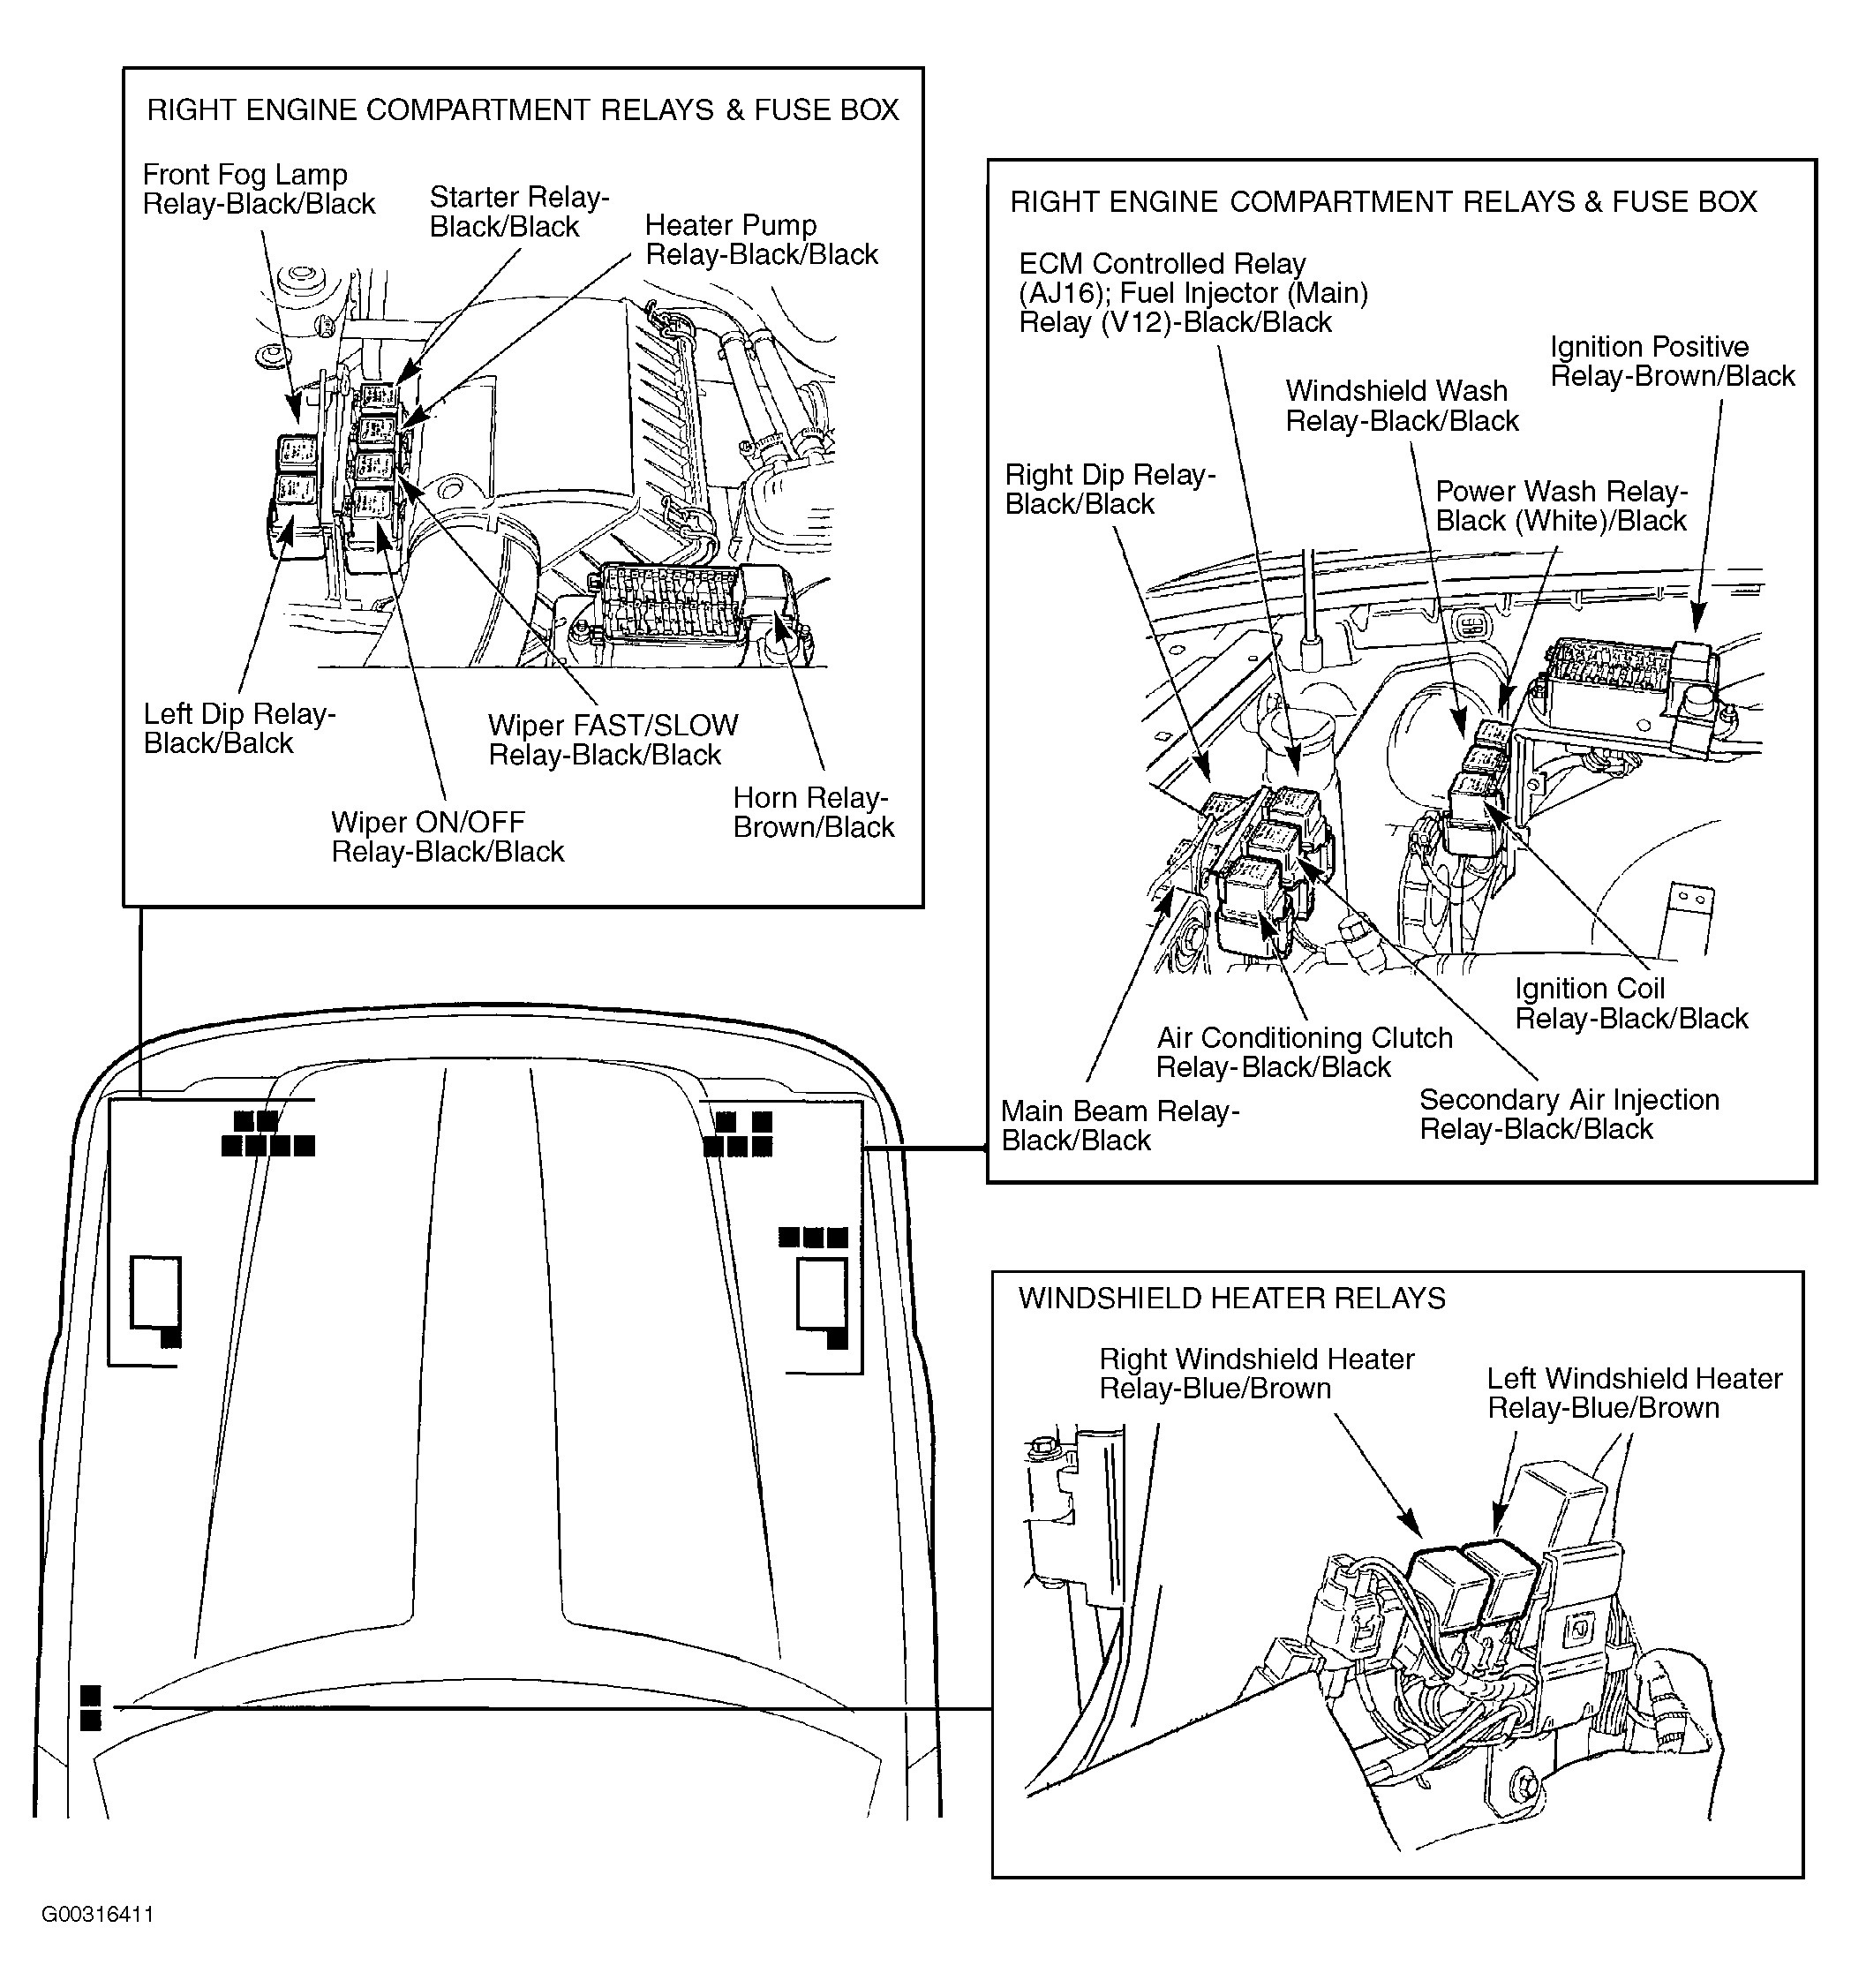 Jaguar XJ6 L 1997 - Component Locations -  Identifying Engine Compartment Fuse/Relay Locations